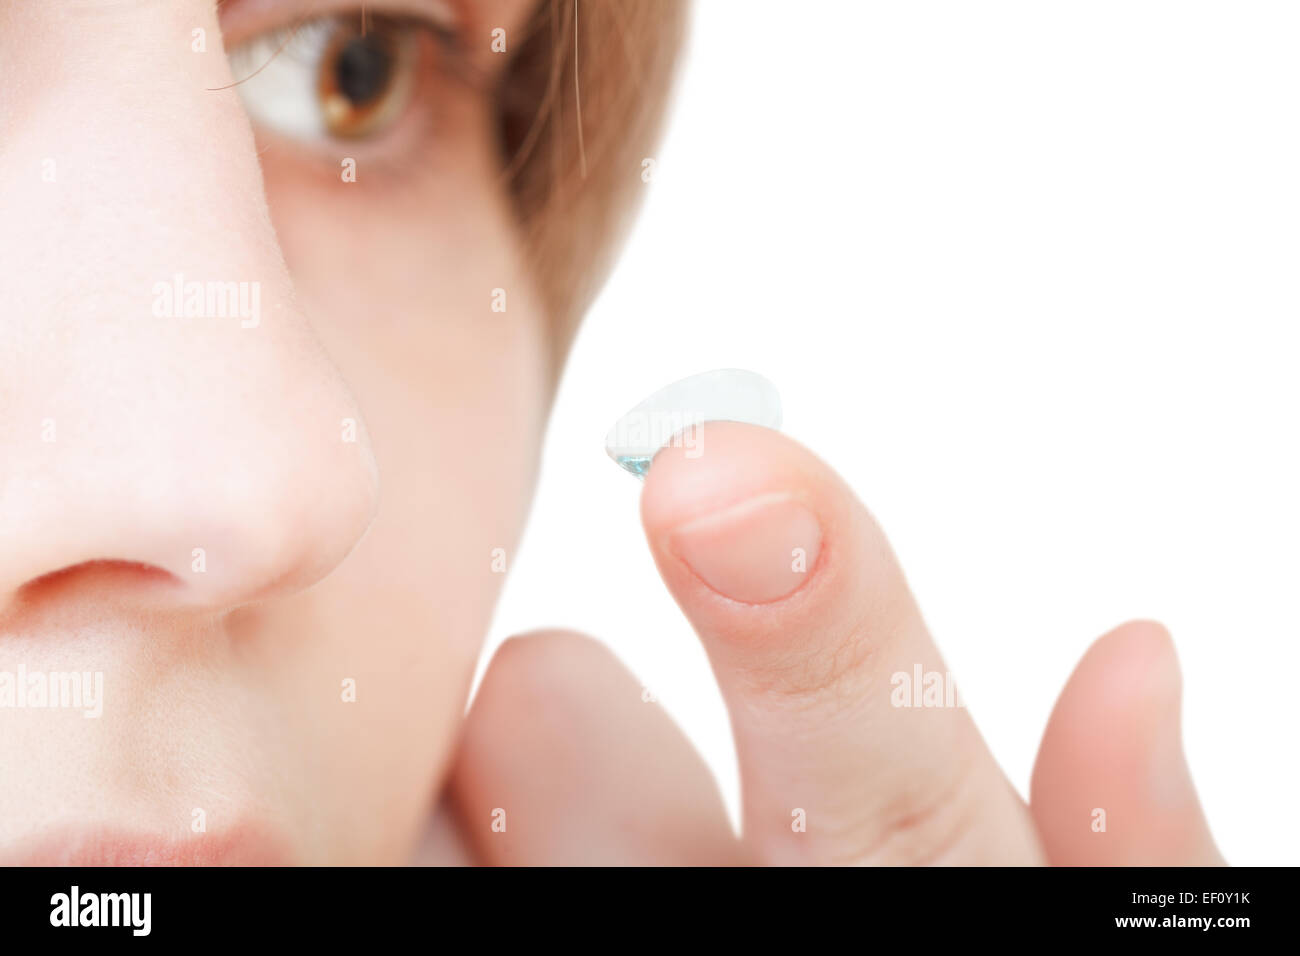 girl inserts corrective lens in eye close up Stock Photo